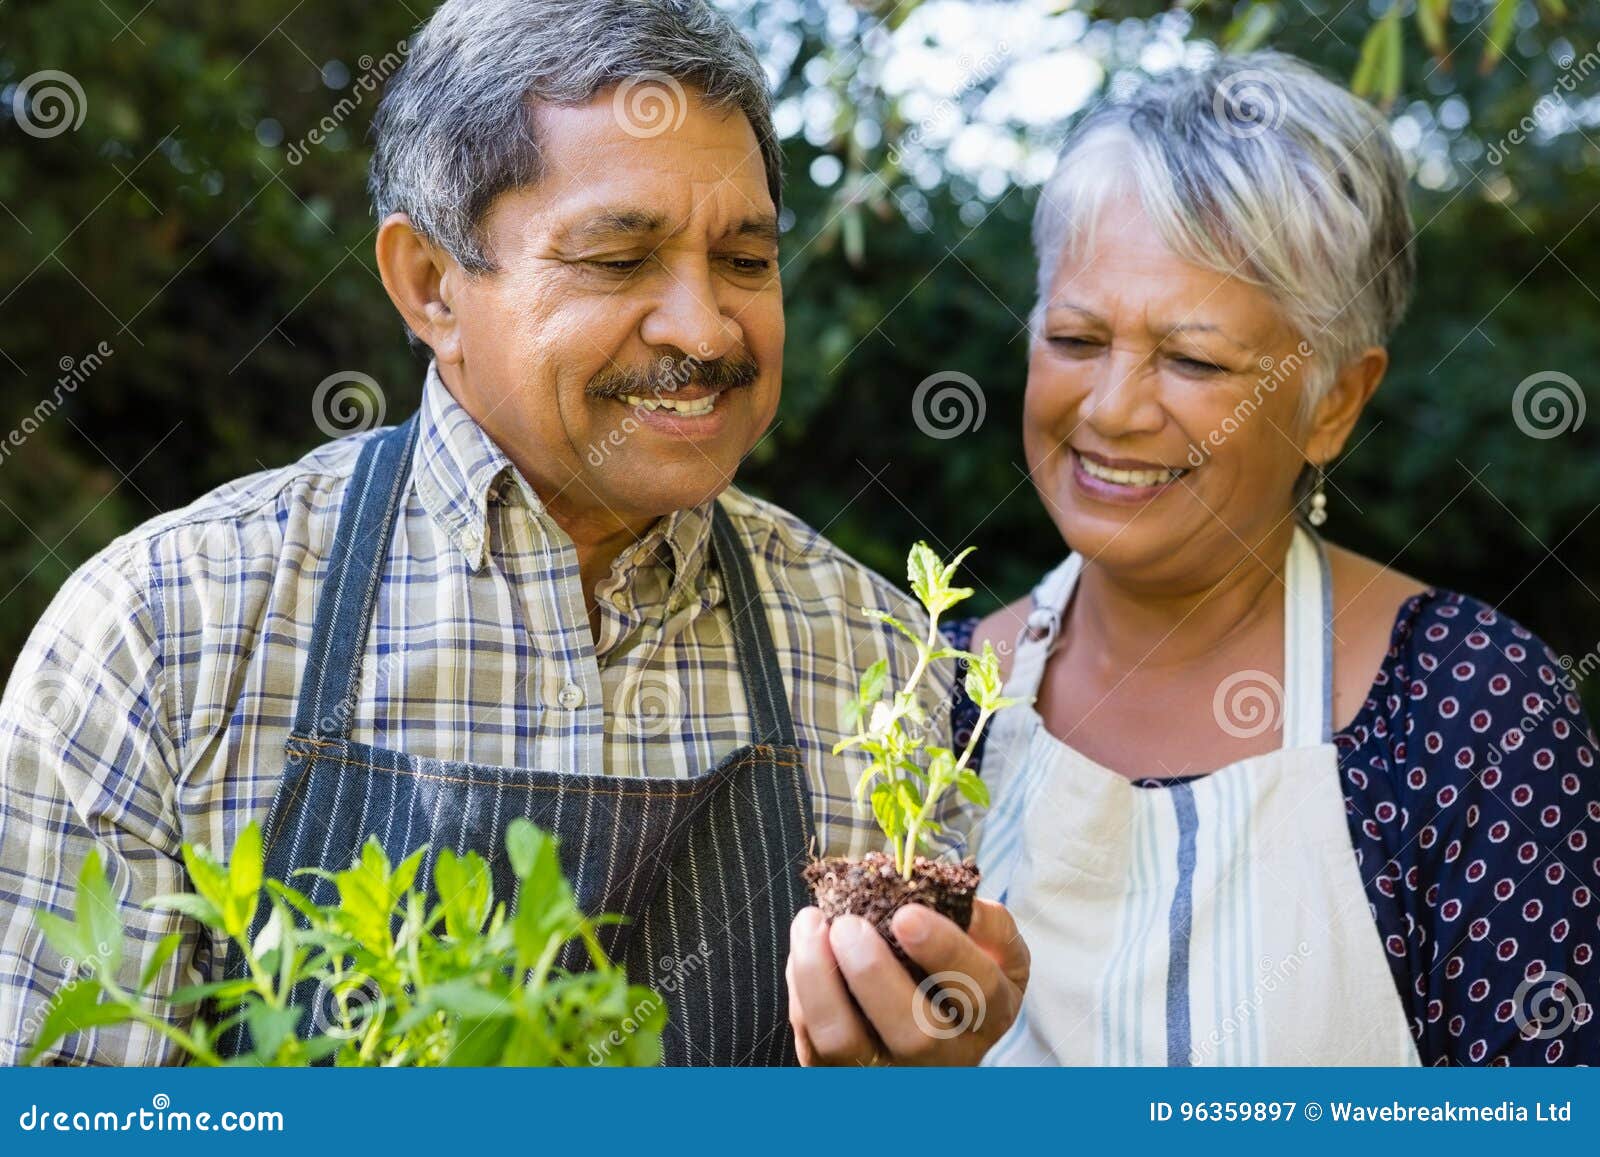 Senior Couple Looking Sapling Plant in Garden Stock Image - Image of ...